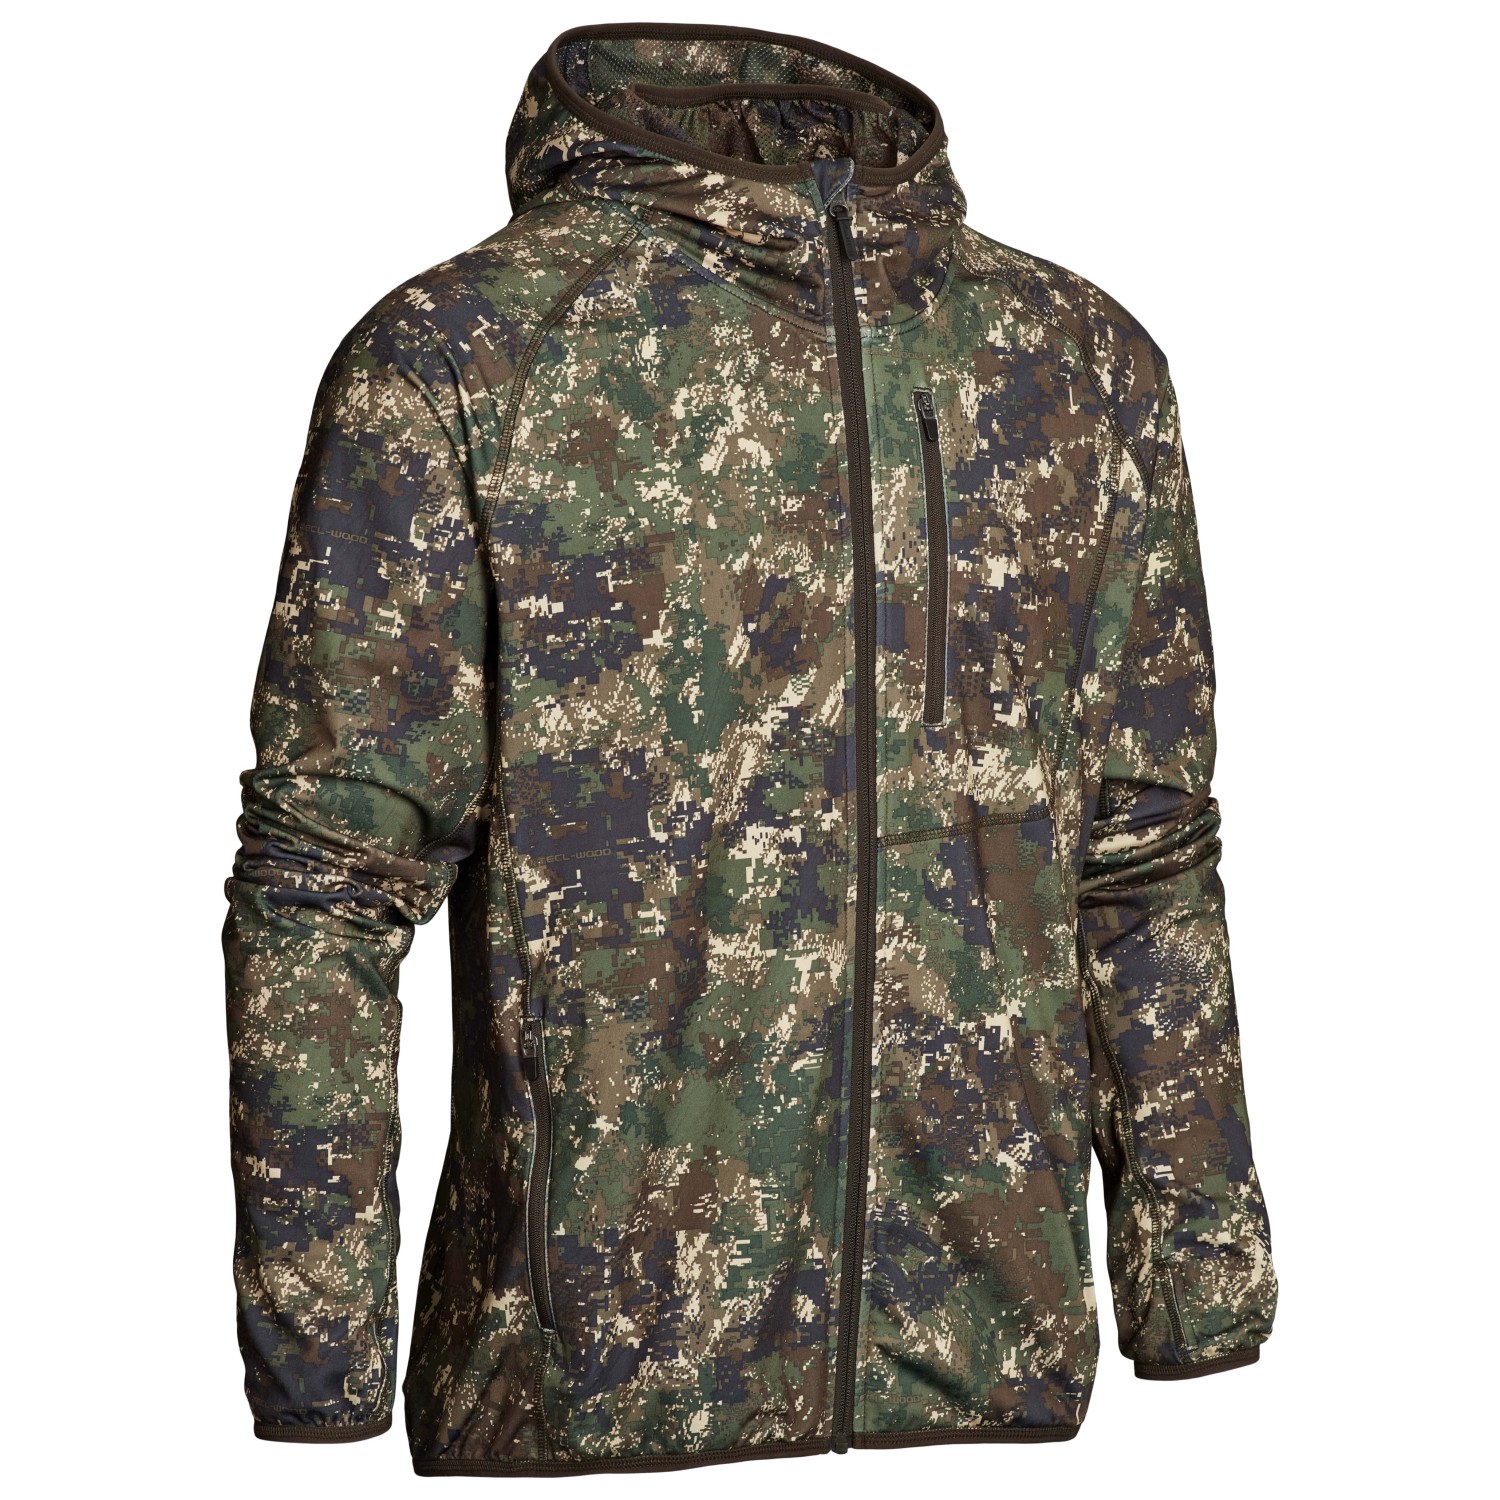 Куртка из софтшелла Northern Hunting Alvar, цвет Camouflage Opt 2 camouflage of military tactics shirt uniform soldier man outdoor leisure hunting camouflage clothing